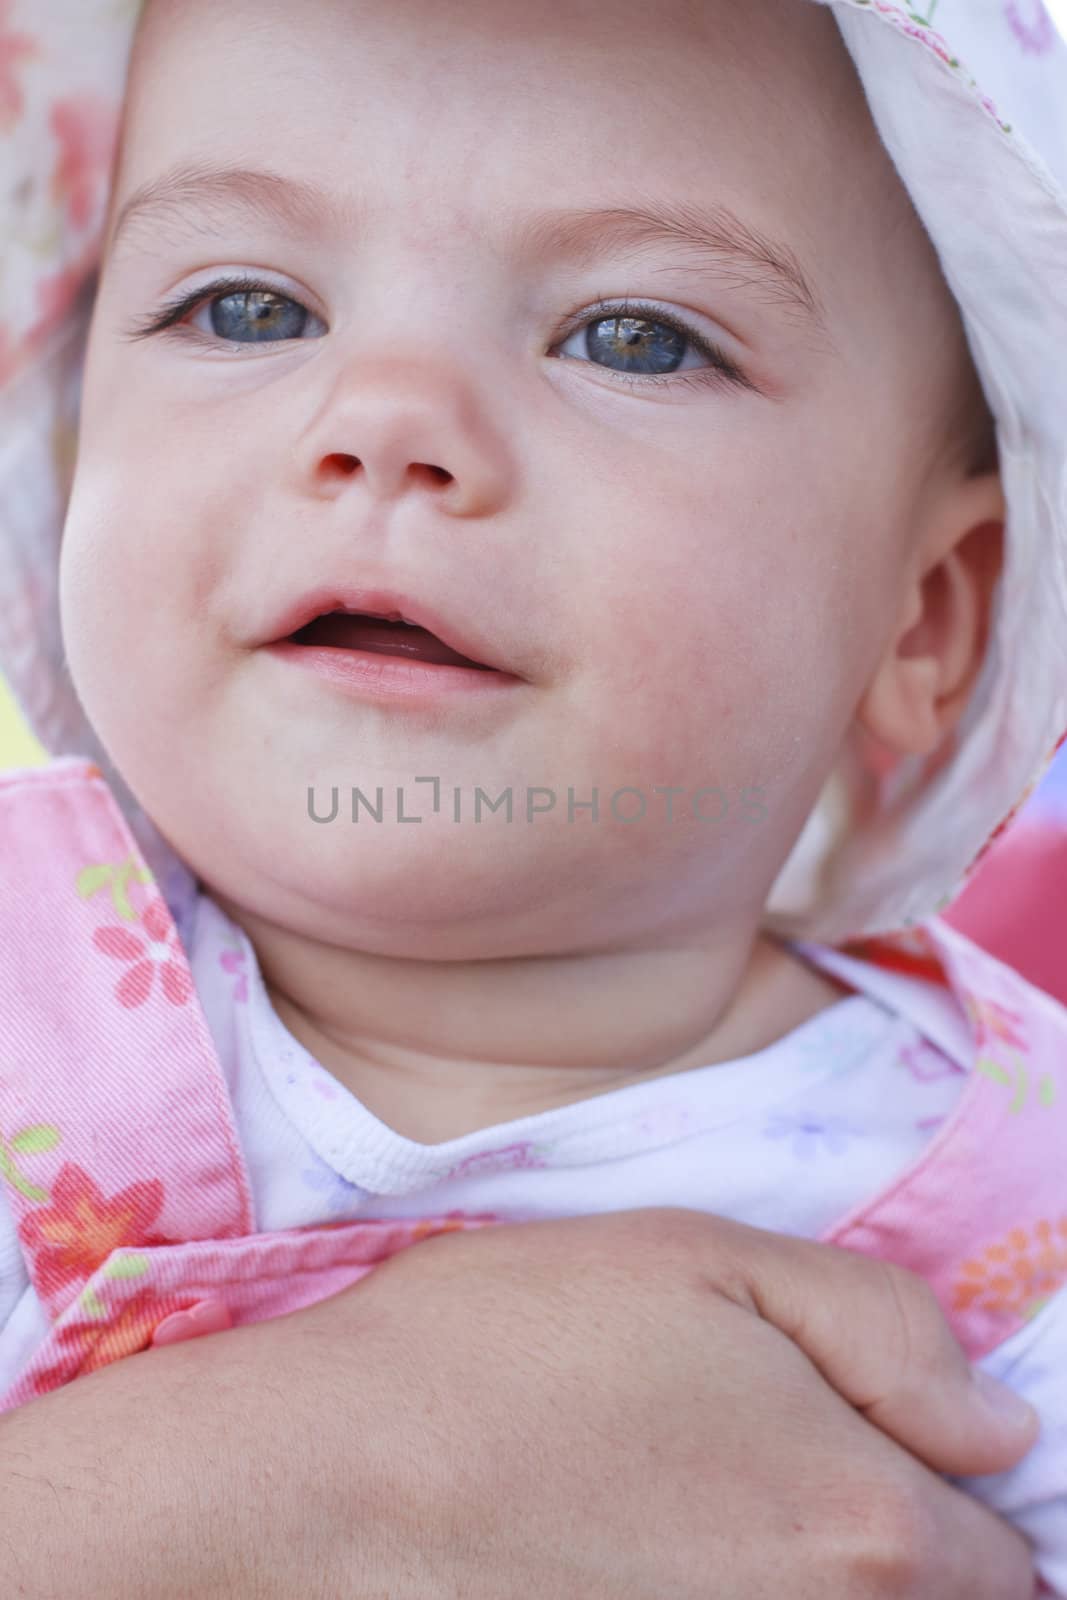 Smiling baby girl with blue eyes